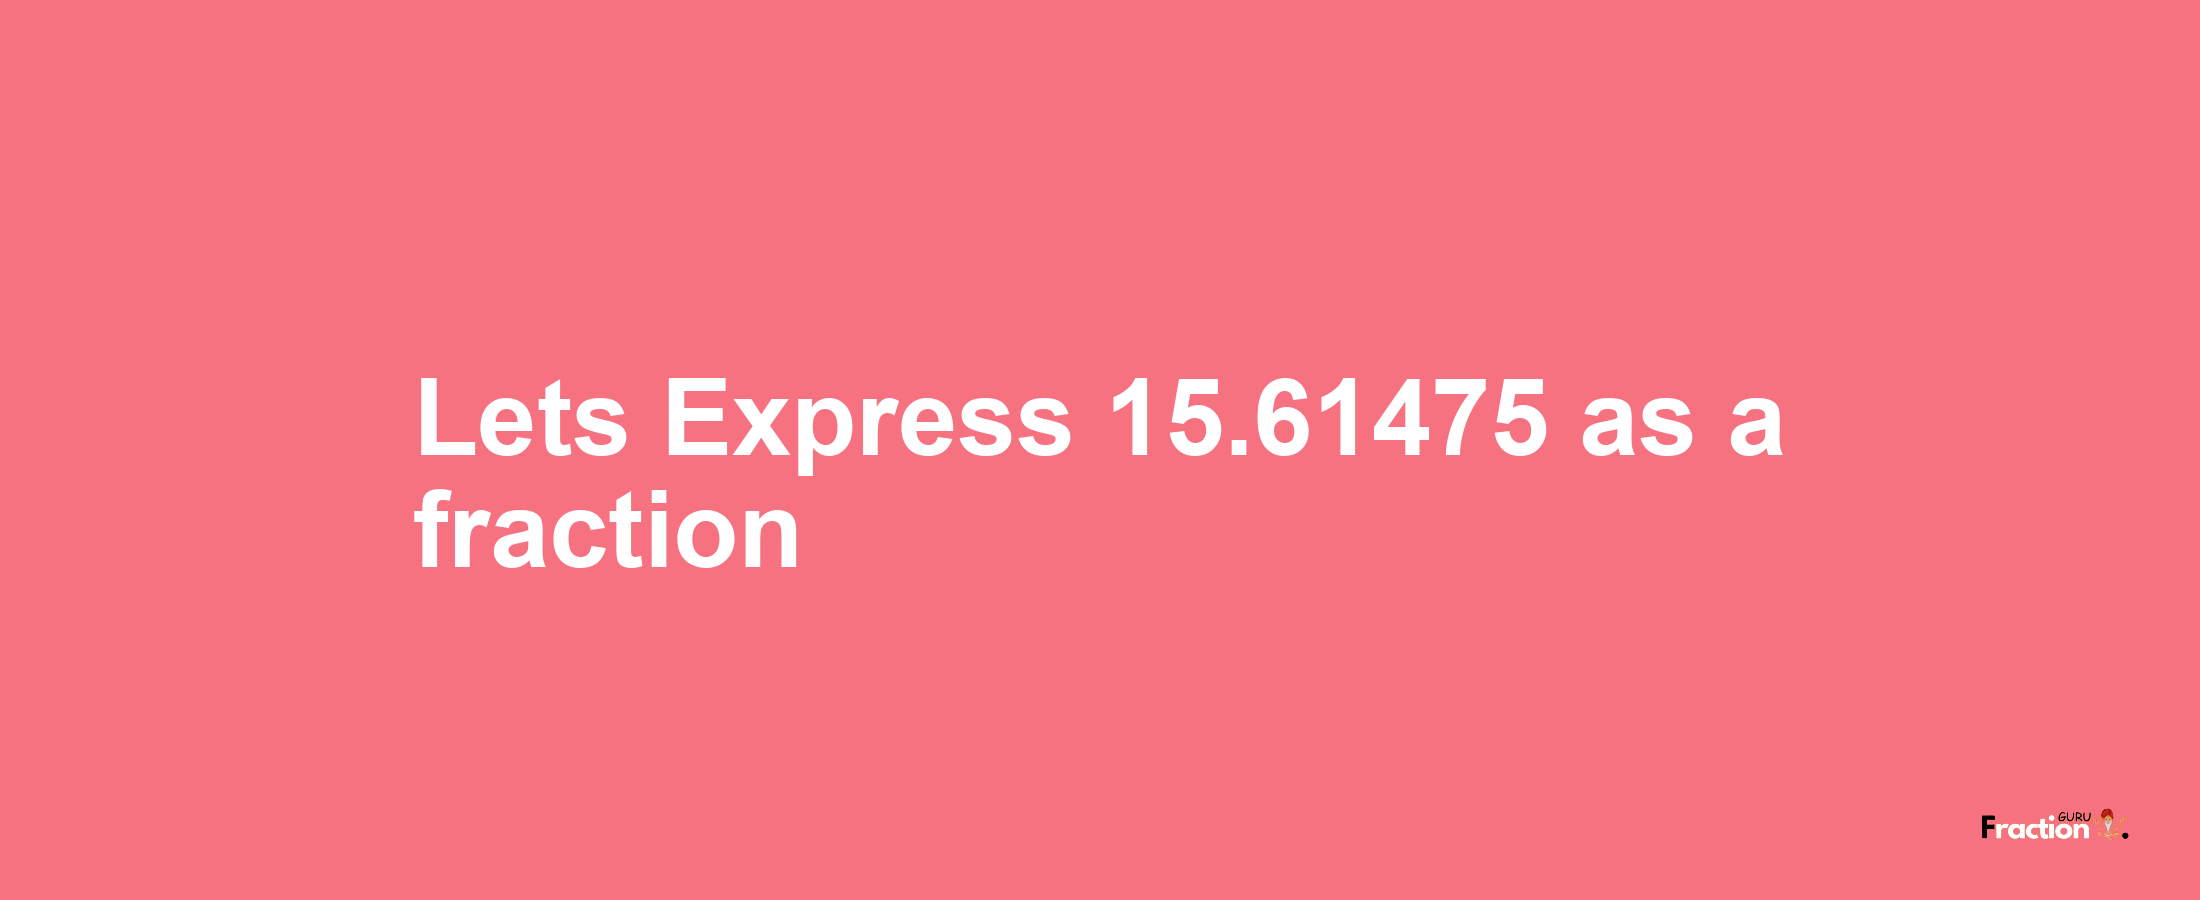 Lets Express 15.61475 as afraction